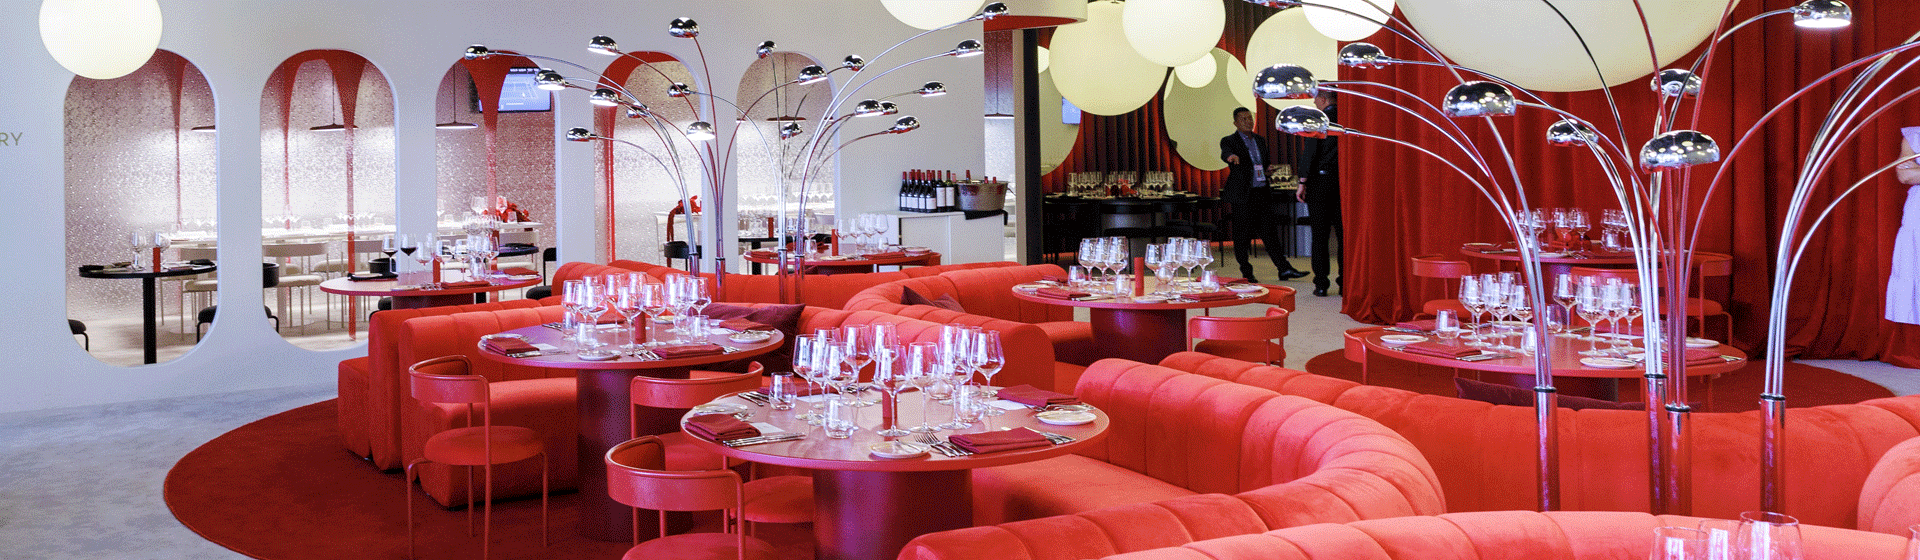 View across Penfolds x Australian Open pop-up restaurant.  3-4 round tables with round red velvet couches, round rugs and hanging lights.